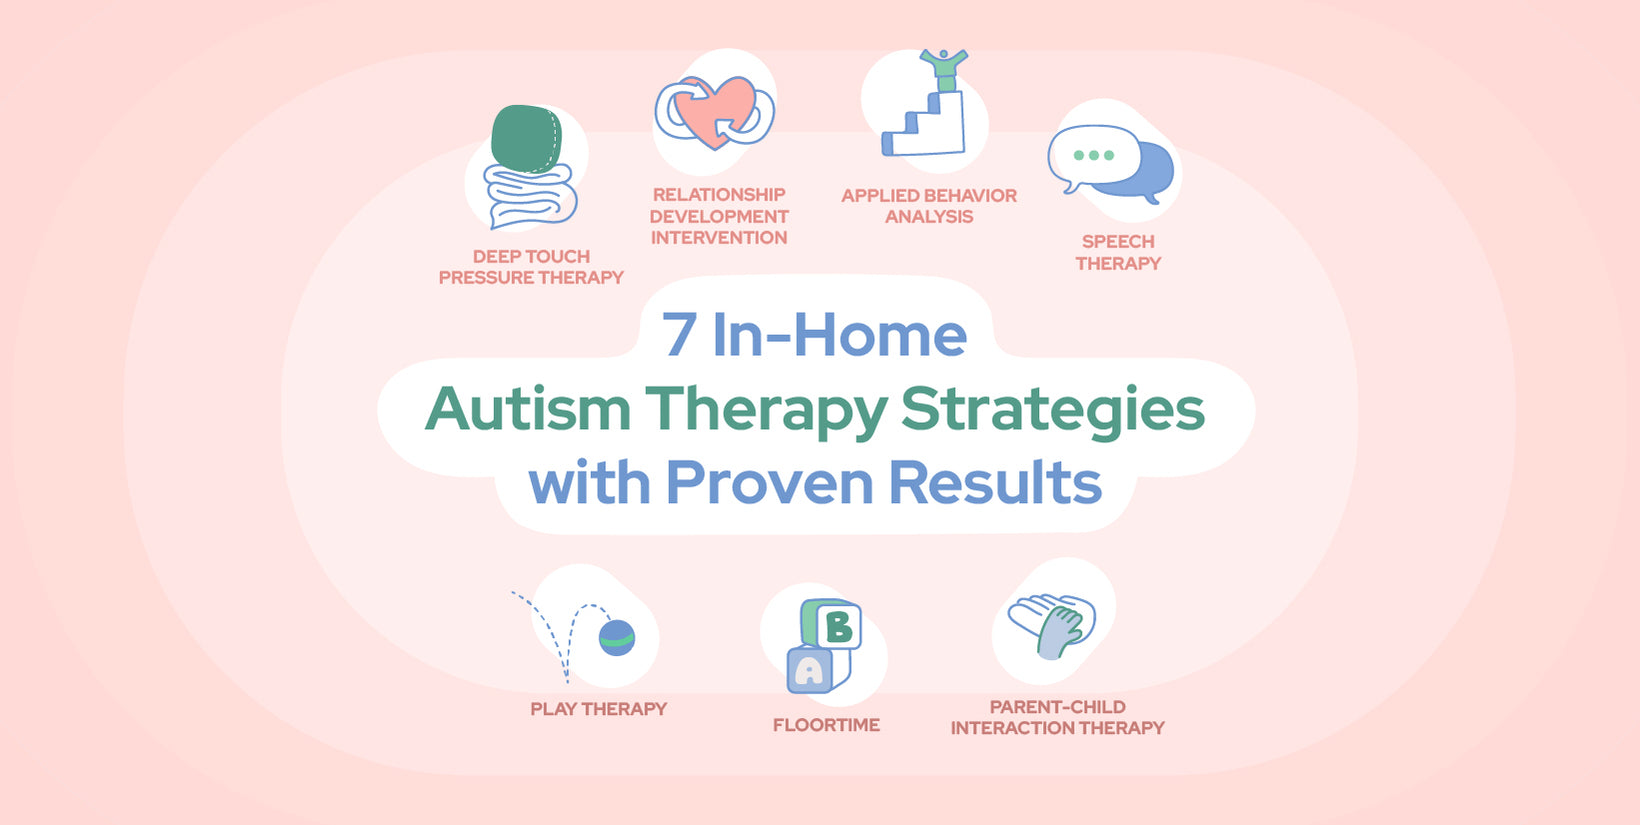 7 In-Home Autism Therapy Strategies with Proven Results